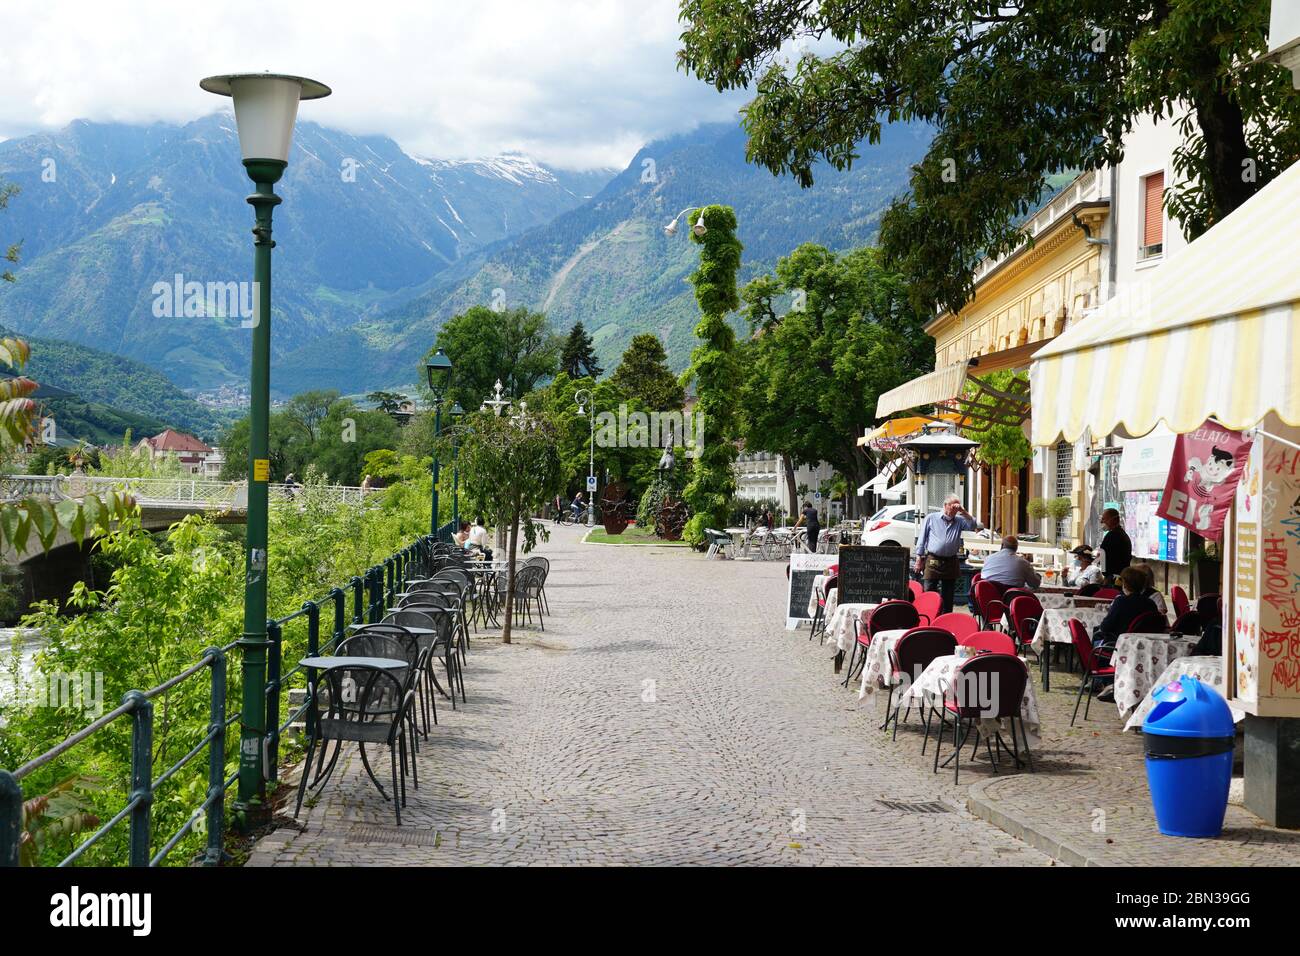 Phase 2 of restrictions because of COVID-19. Some restaurants in Merano, South Tyrol, Italy are already opened. Stock Photo